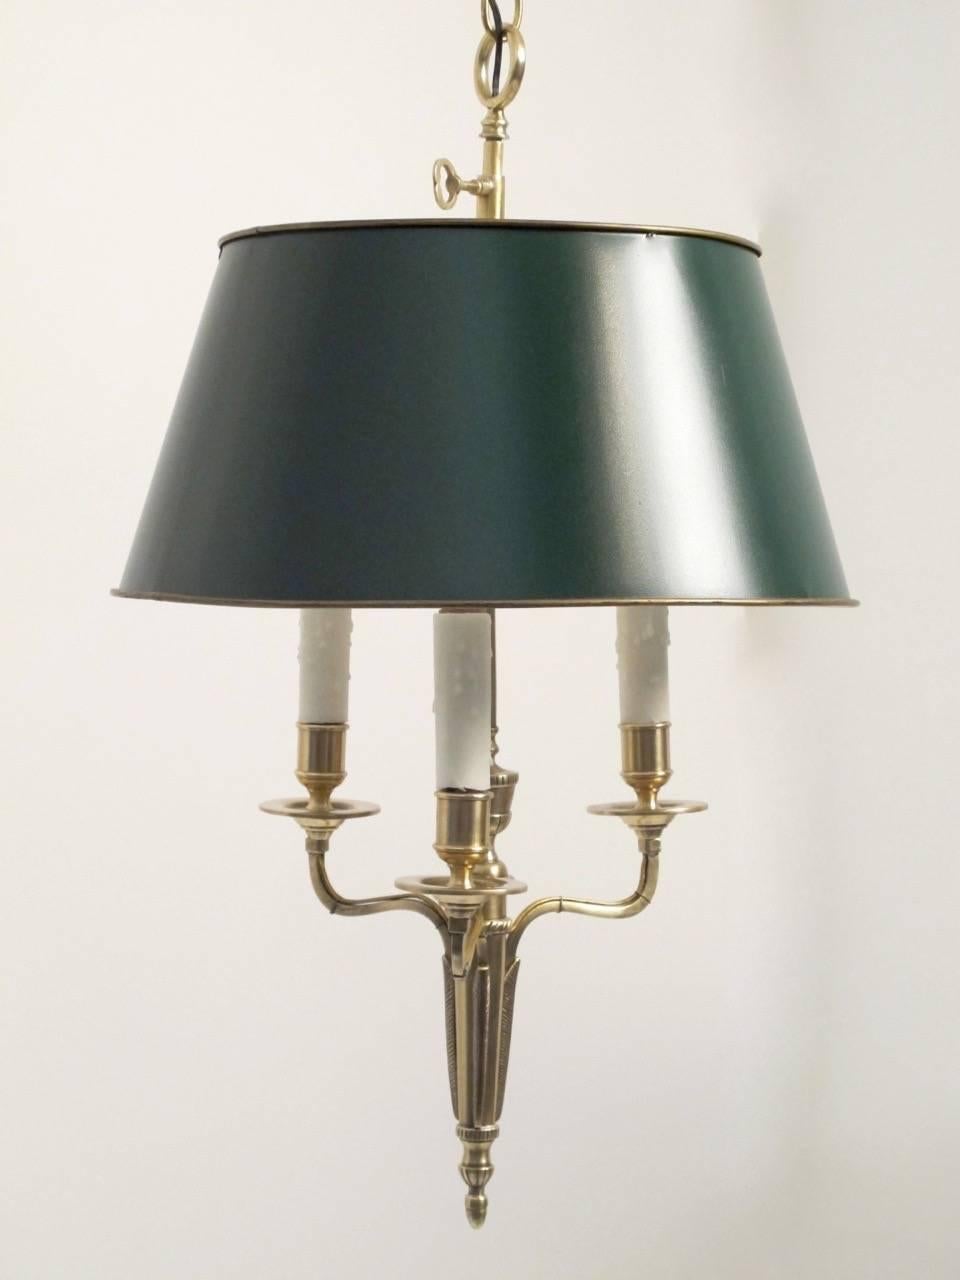 Three-light hanging bouillotte brass candle lamp with wax candle sleeves and green painted tole' shade. Recently restored and converted to electric, French, late 19th century.